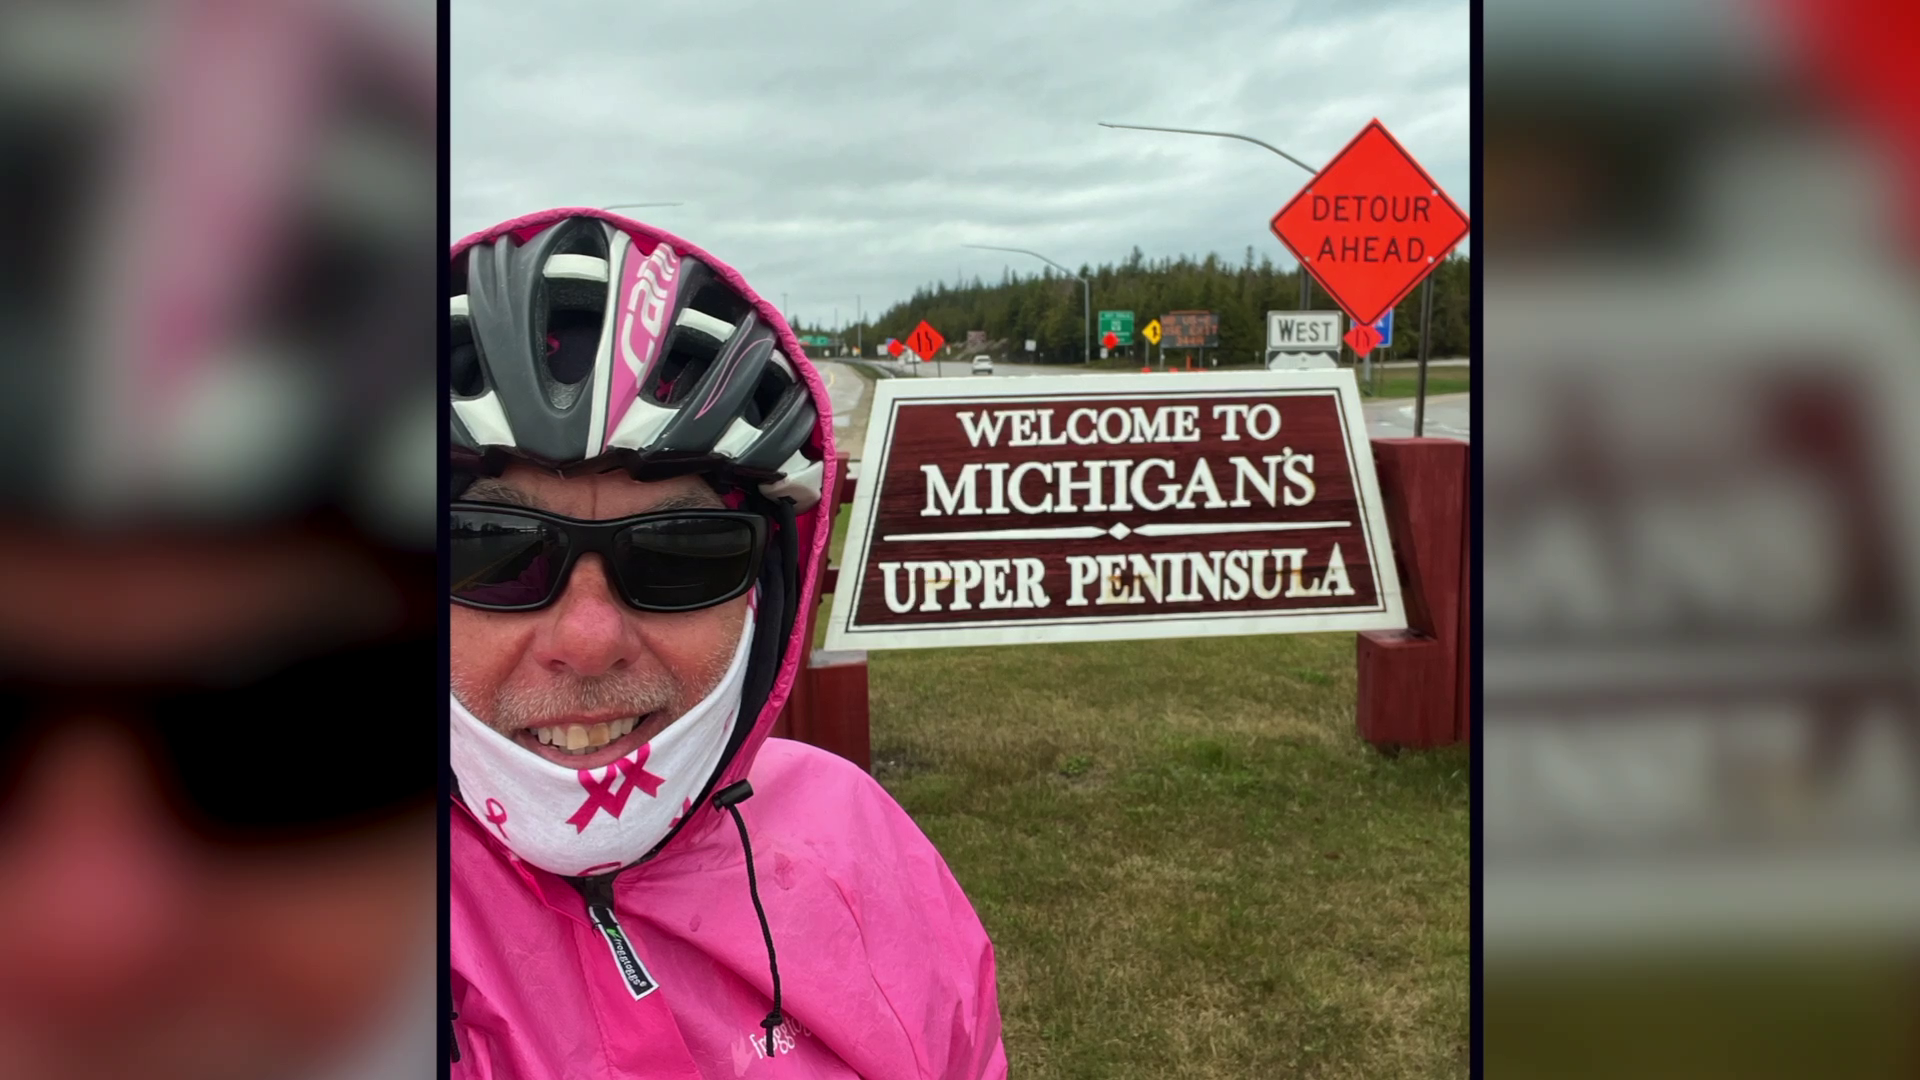 Man rides thousands of miles to support breast cancer research, passes through Northern Michigan